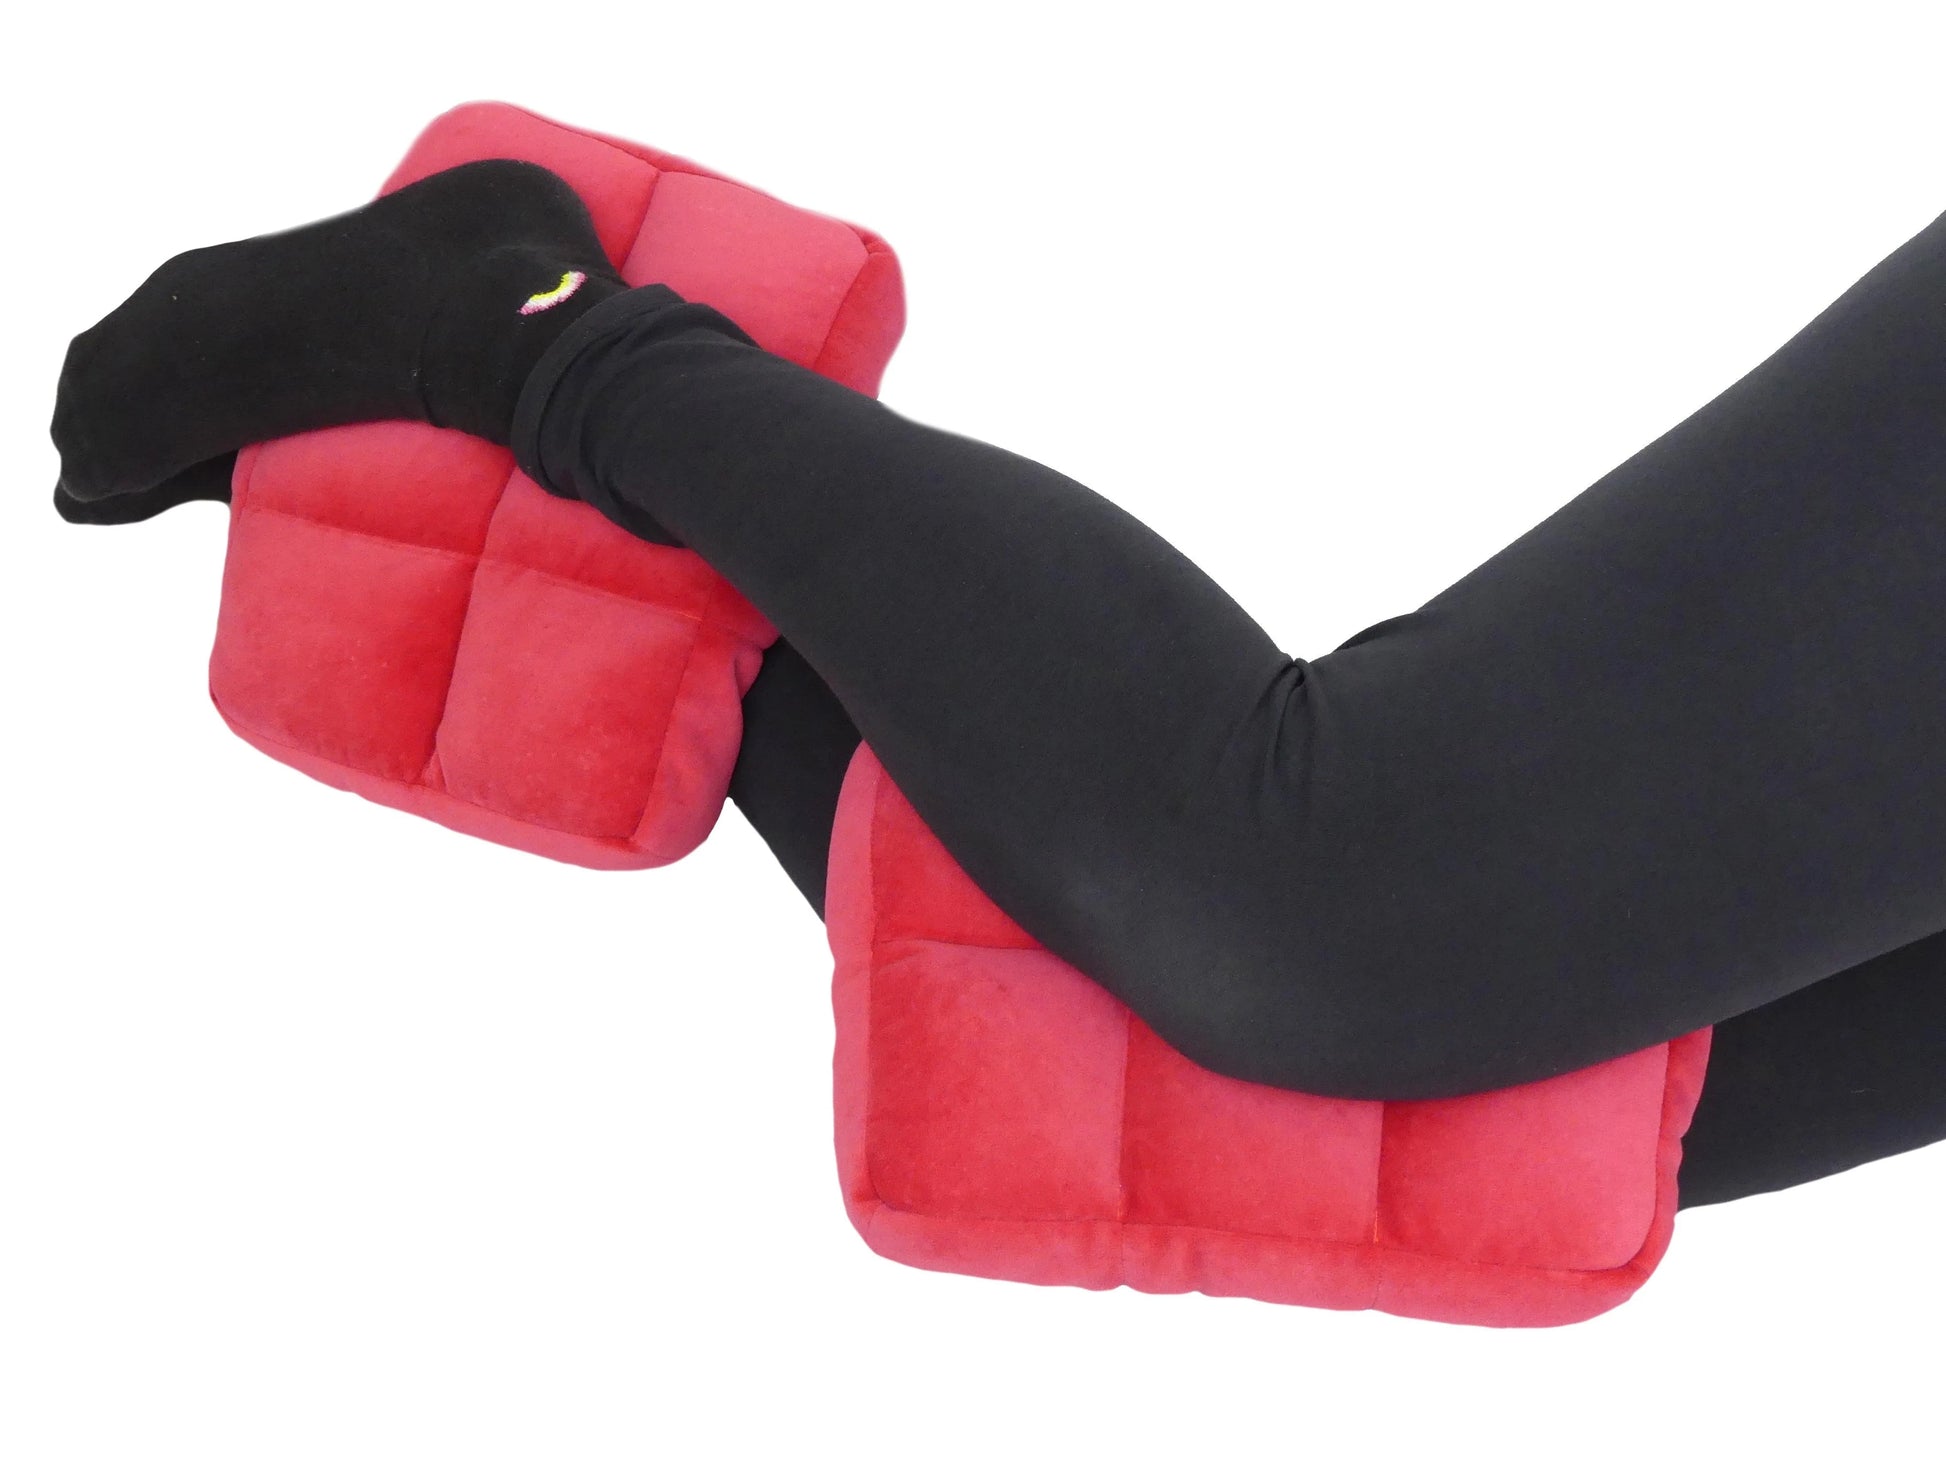 knee and ankle support cushions